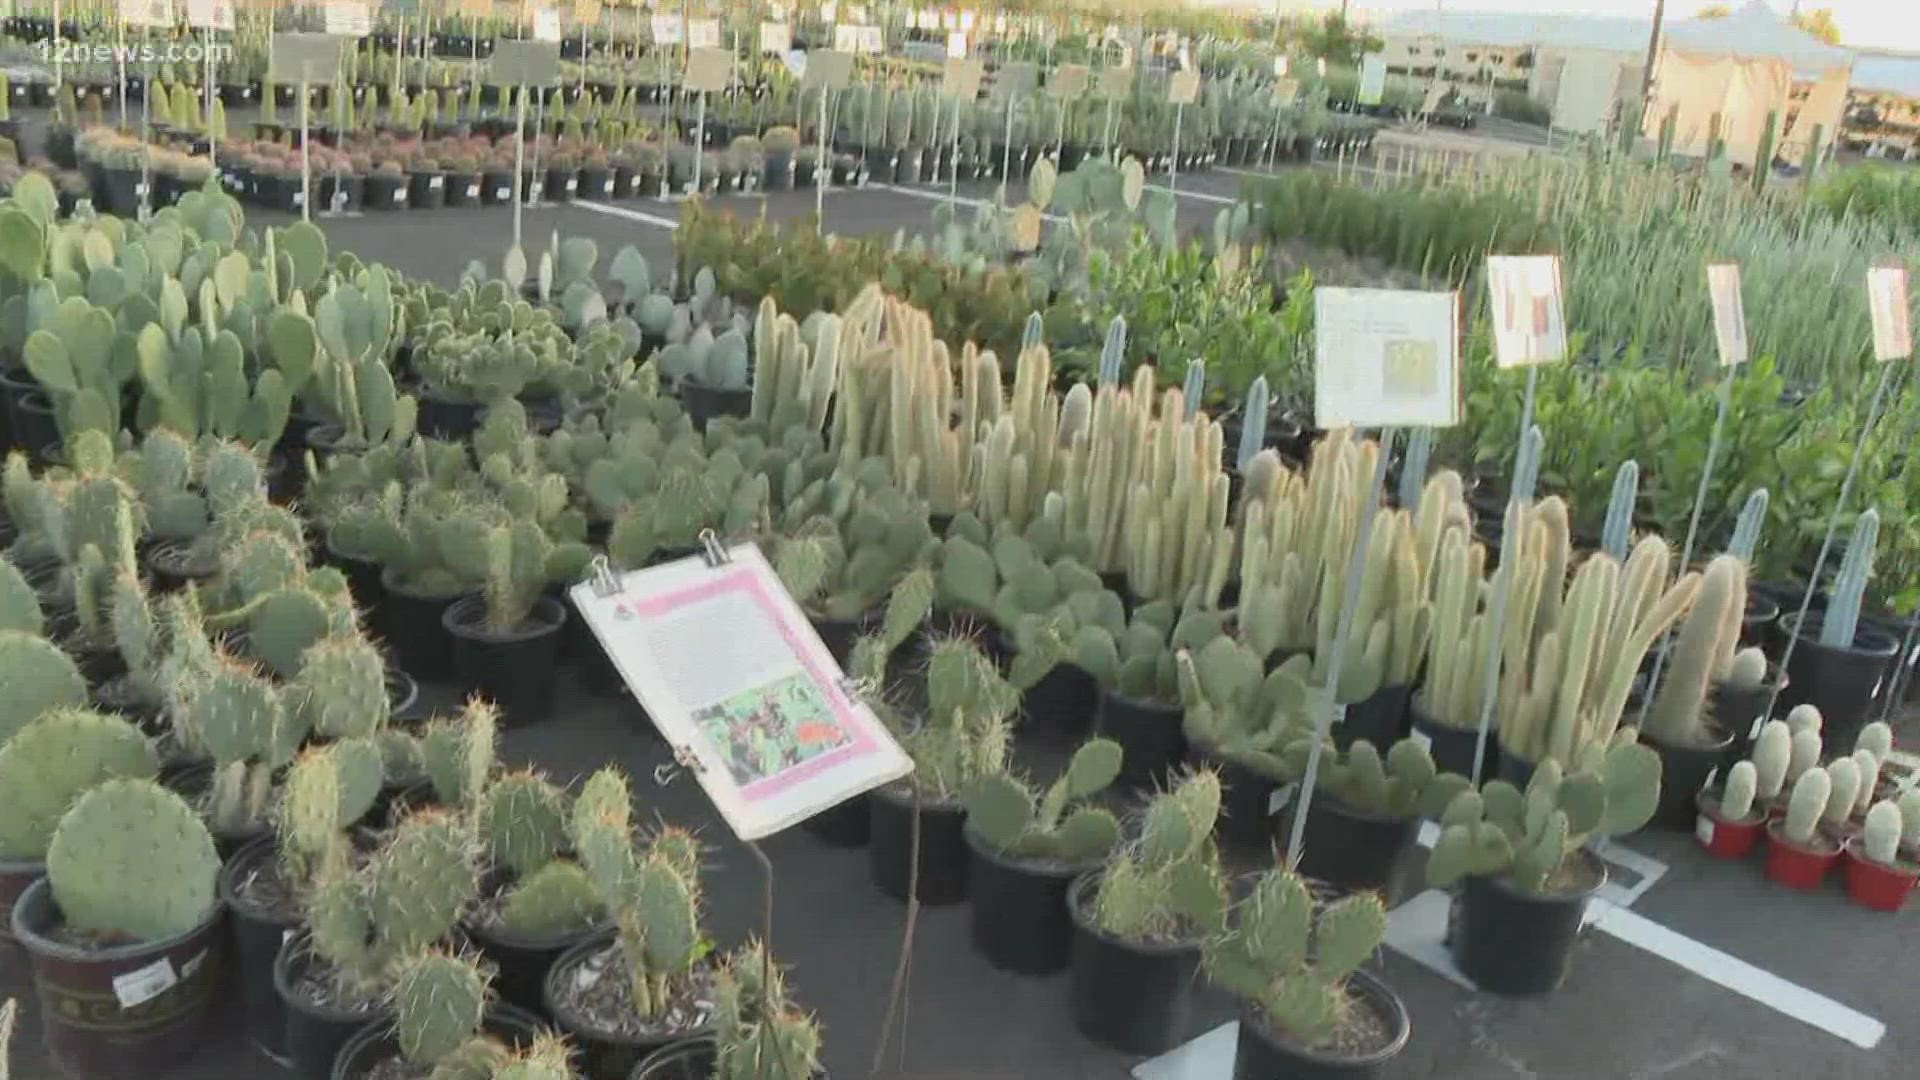 The plant sale opens for members on Thursday and opens to non-members on Saturday, garden officials said.